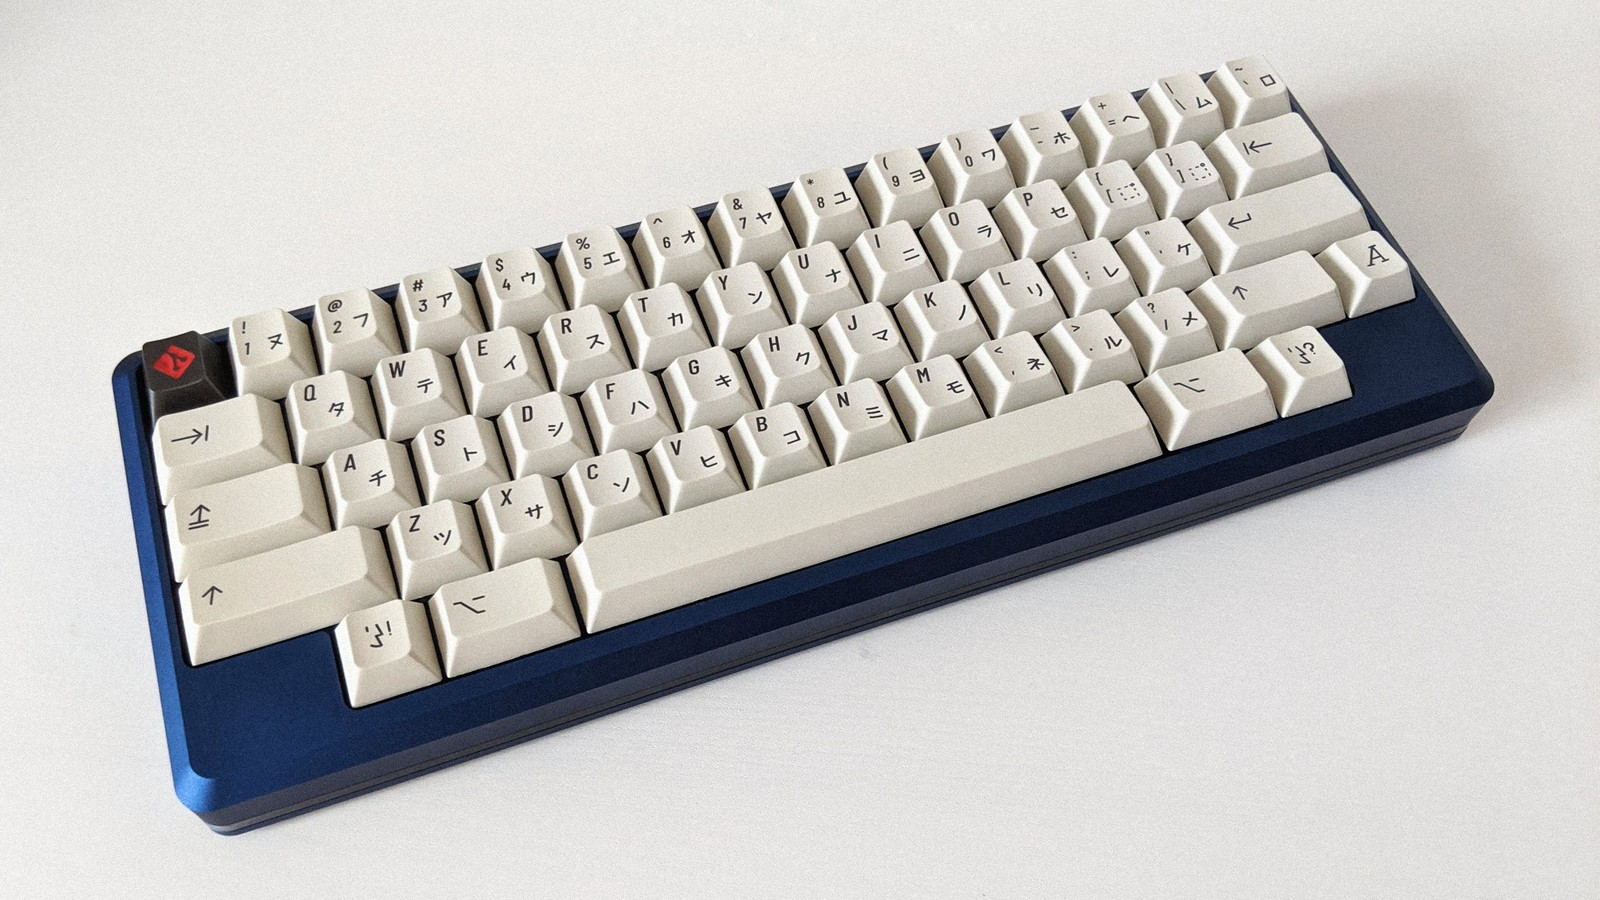 Extended 2048 with RAMA Git keycap on blue Tokyo60  on white background